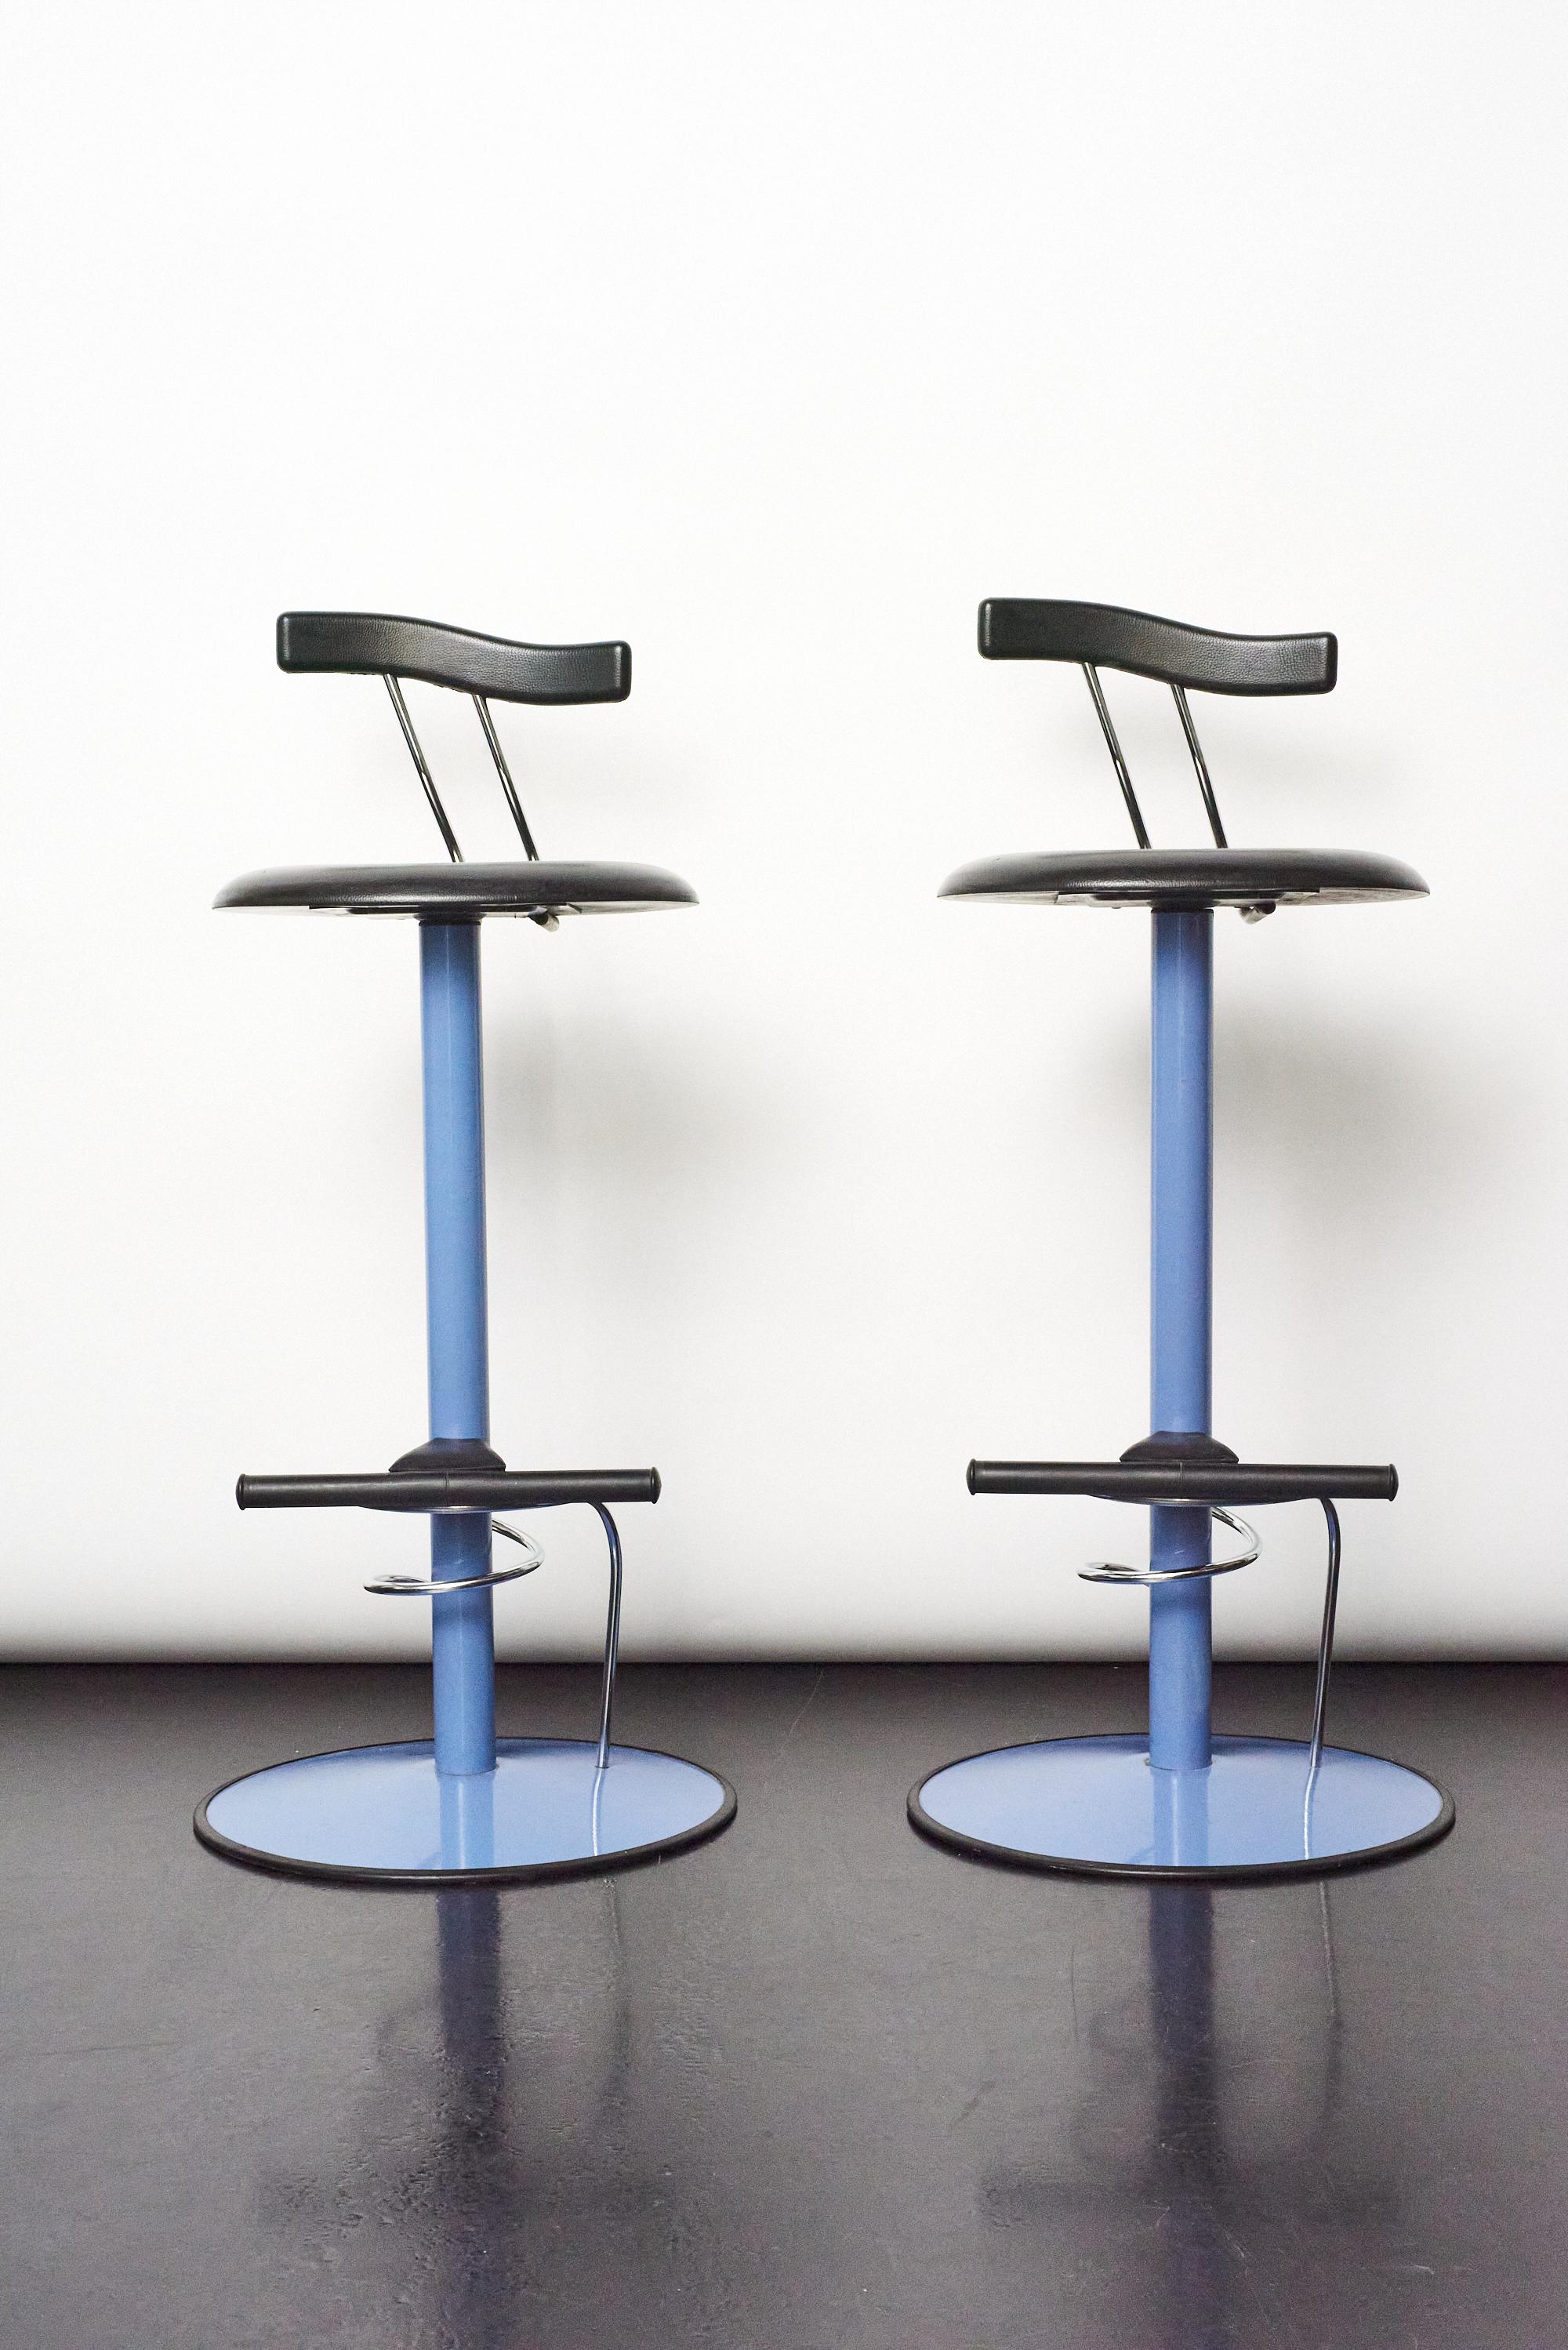 A pair of purple Postmodern Memphis style bar stools, Italy 1980s.
Periwinkle purple lacquered steel with black moulded rubber seats and backs.
Very good condition.